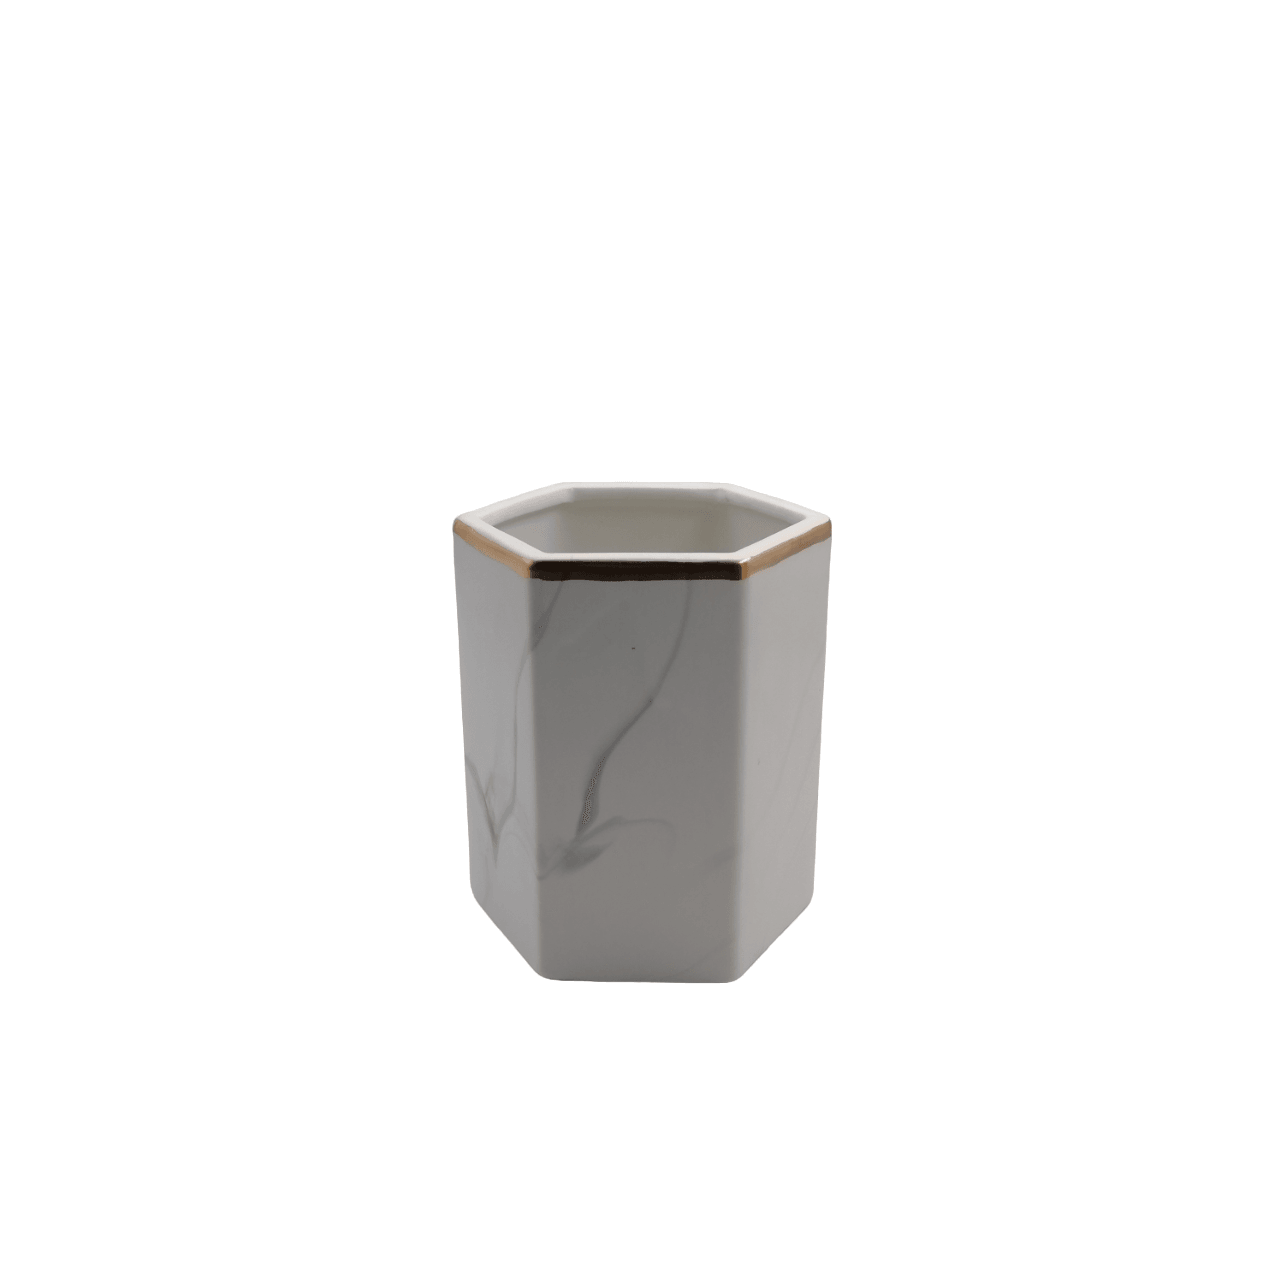 Ceramic Marble Style Hexagonal Shaped Vase - Home And Trends